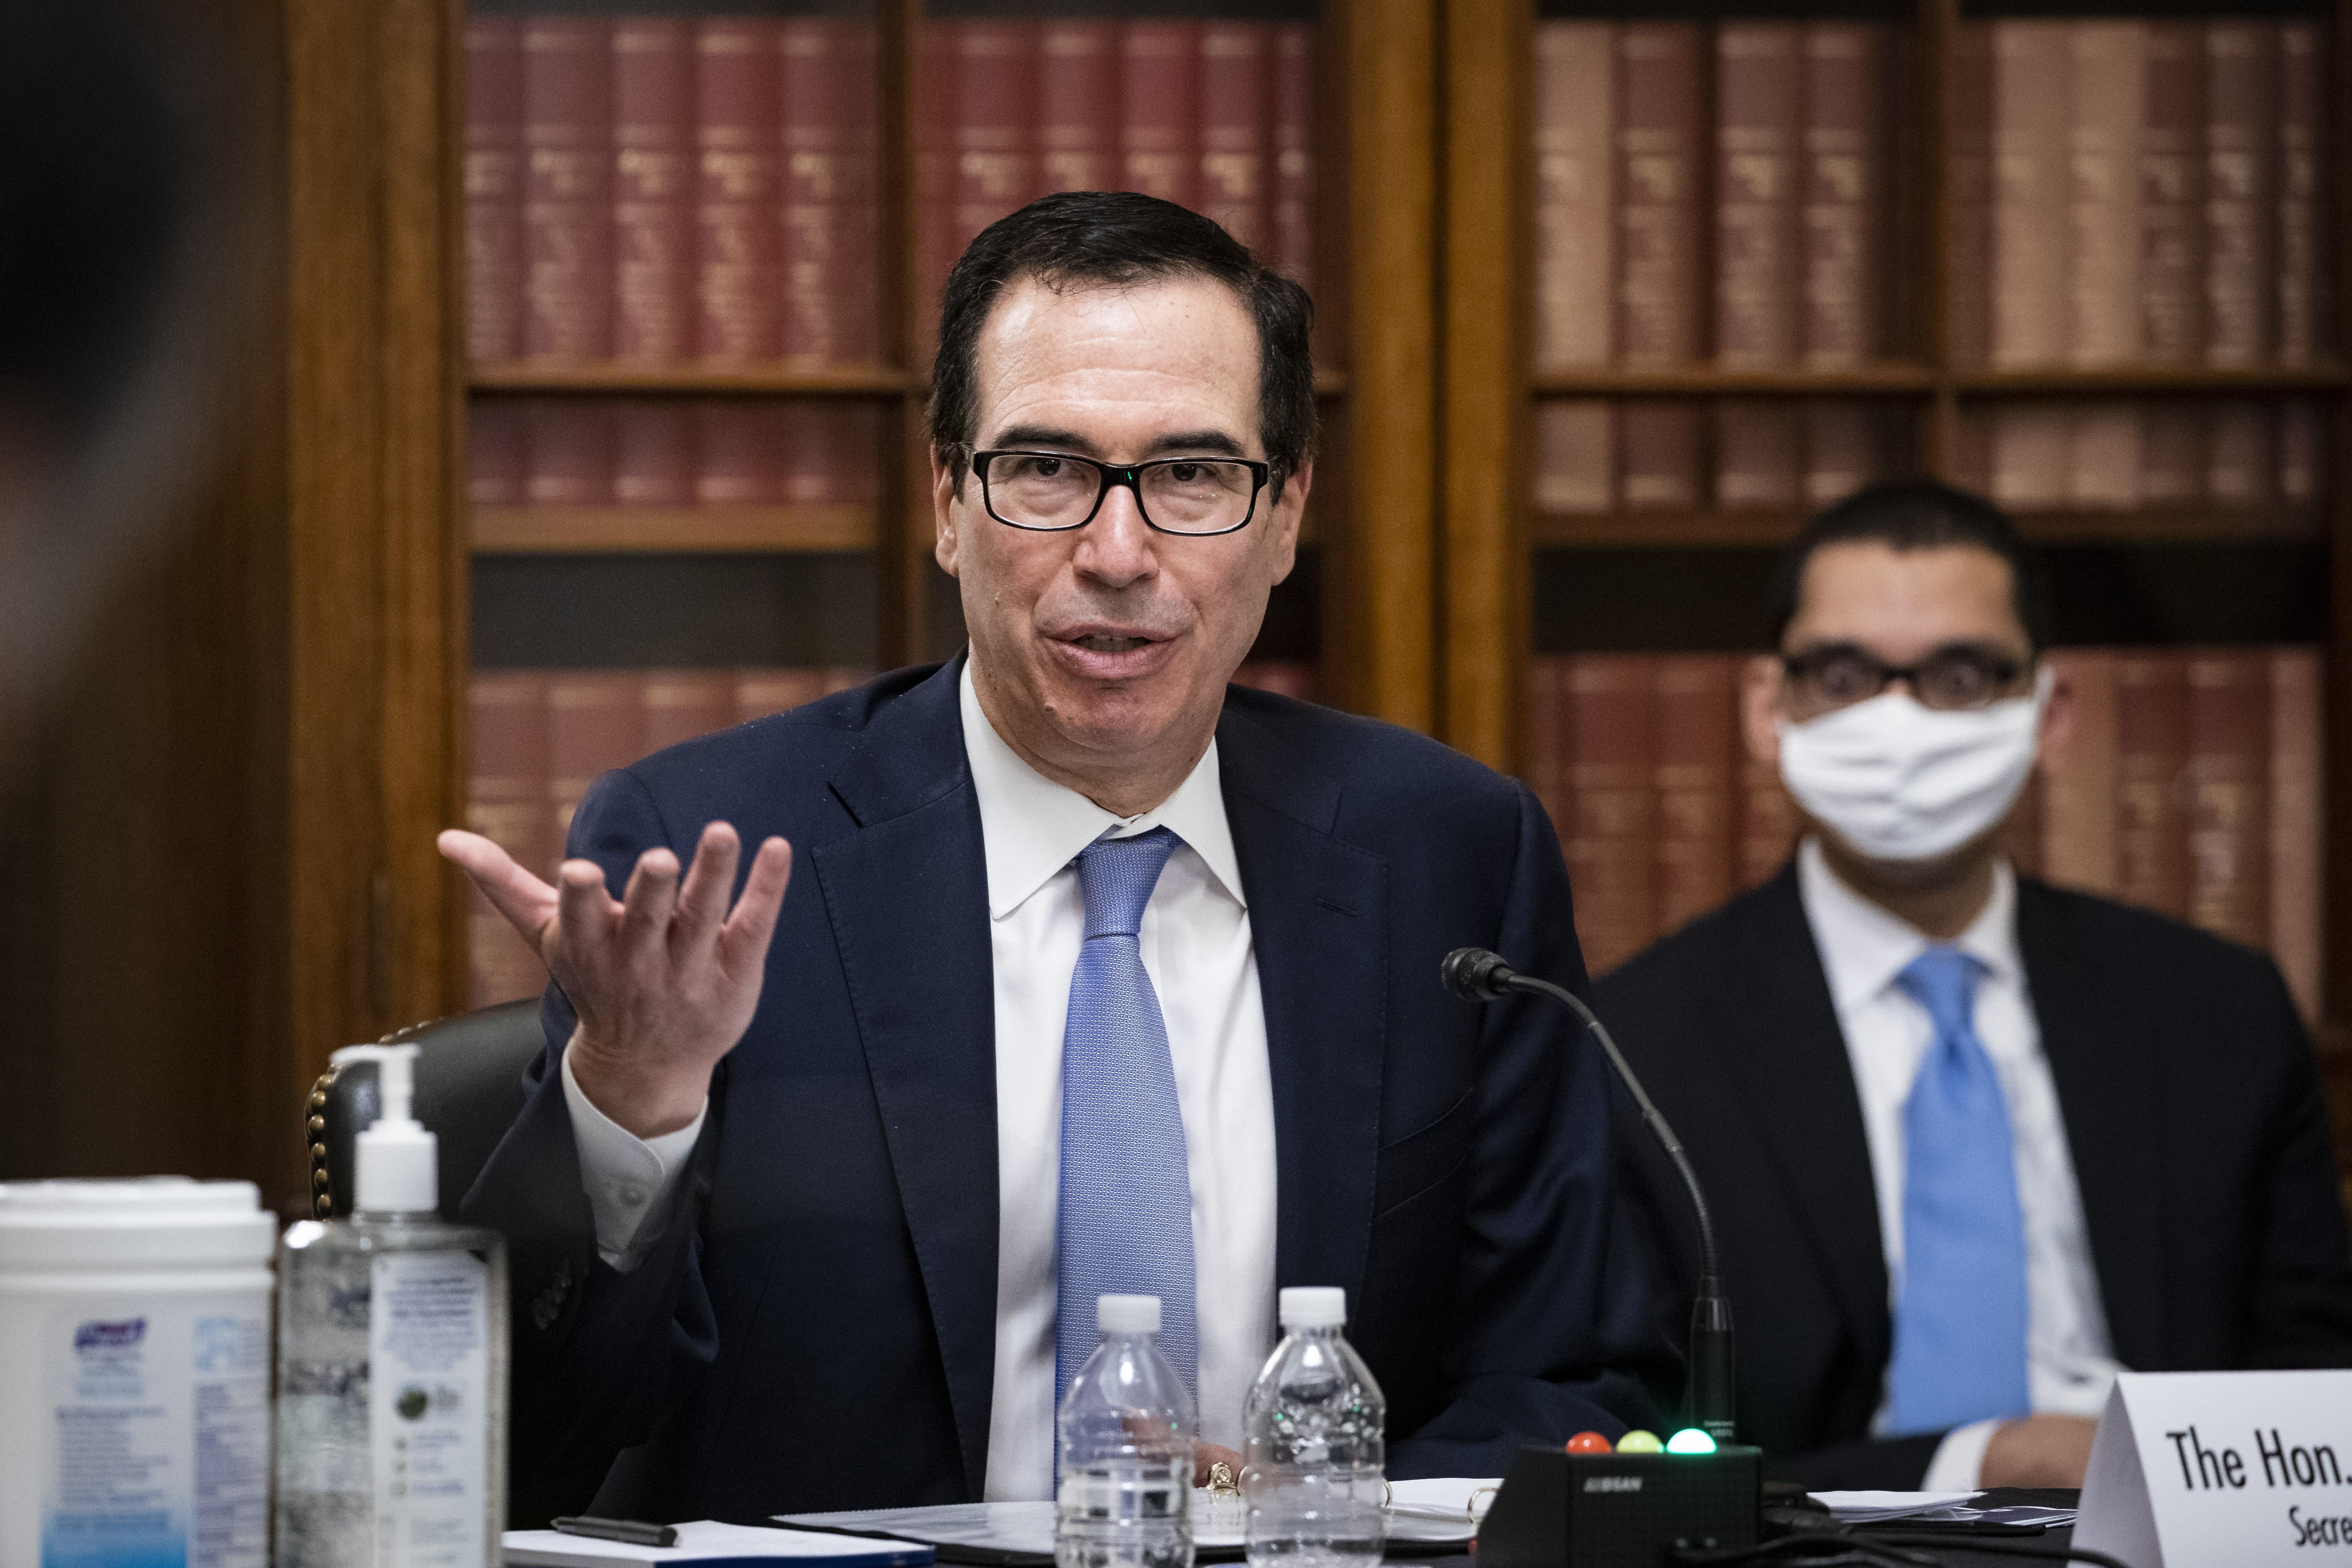 Steven Mnuchin sits at a table and raises his hand while speaking. A man sits behind him, wearing a face mask.